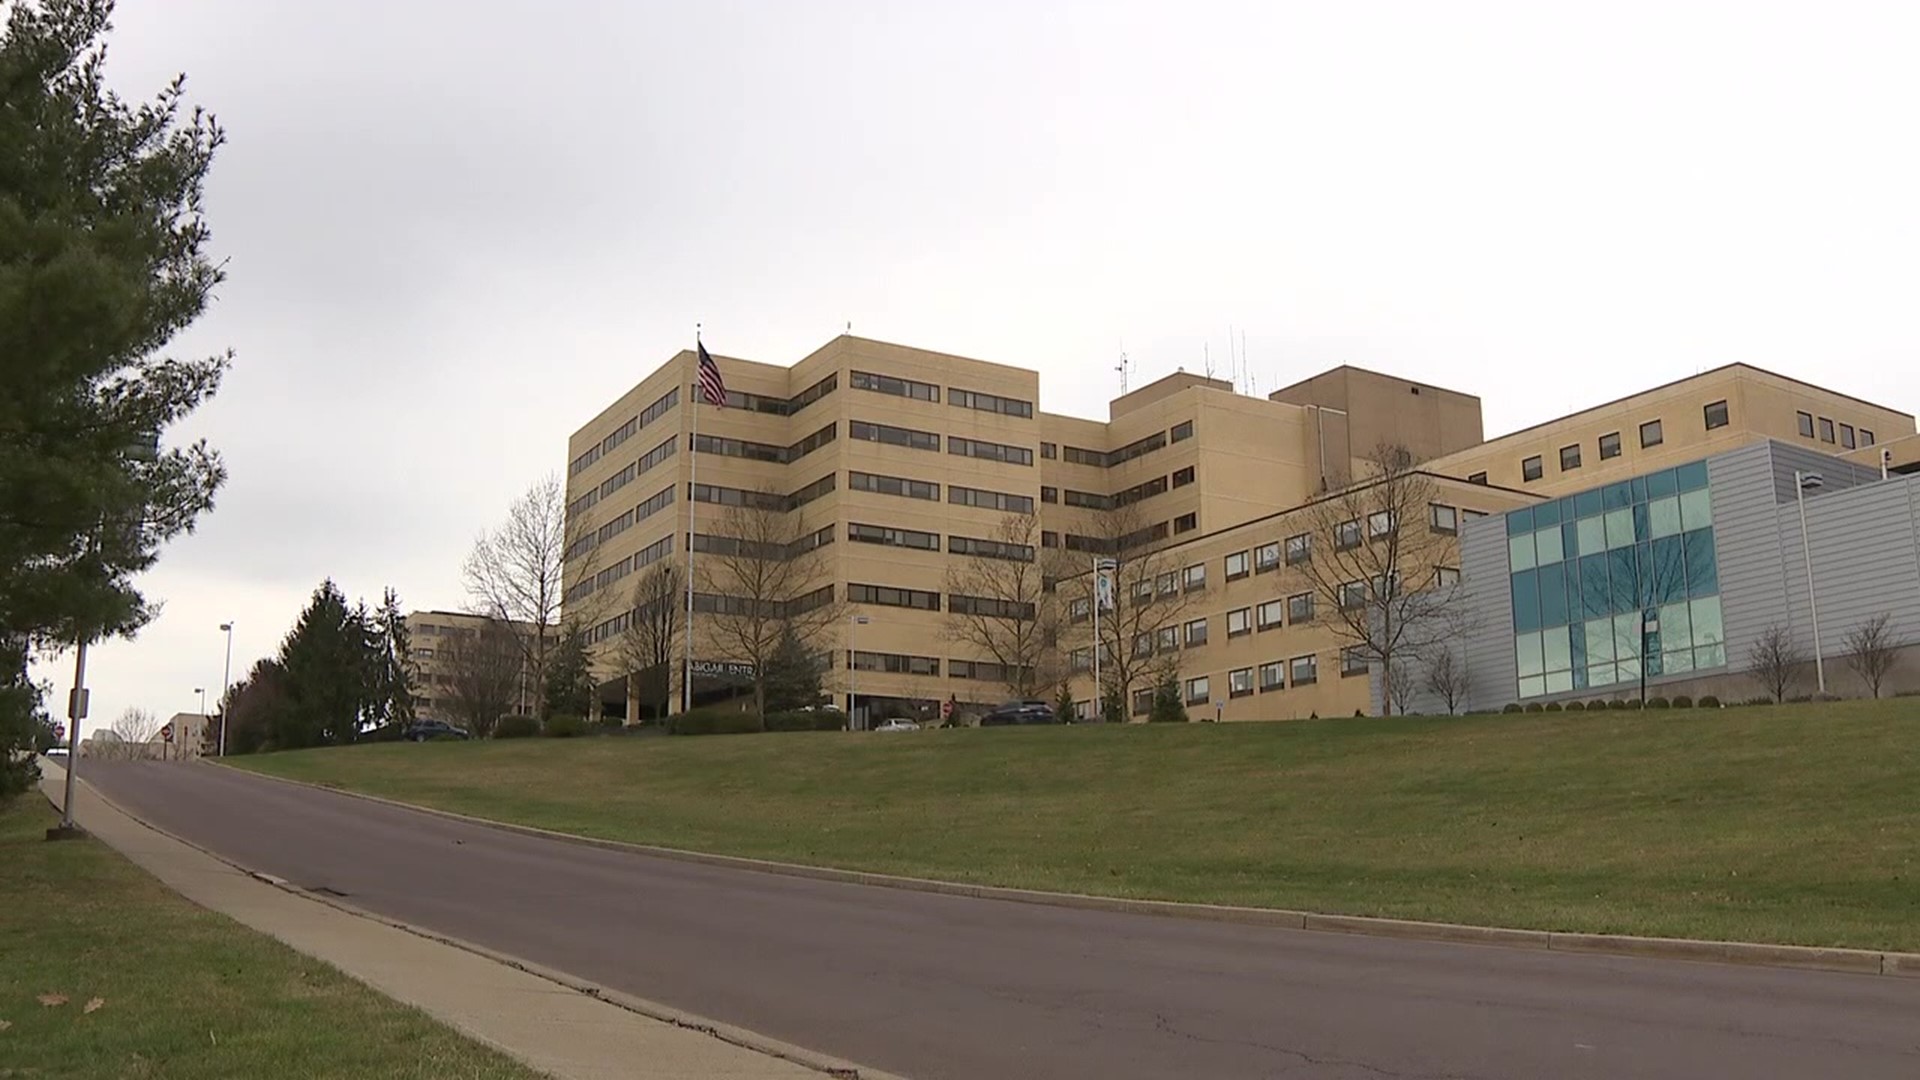 The hospital system based in central Pennsylvania announced it has been sold and will become part of a new group called Risant Health.